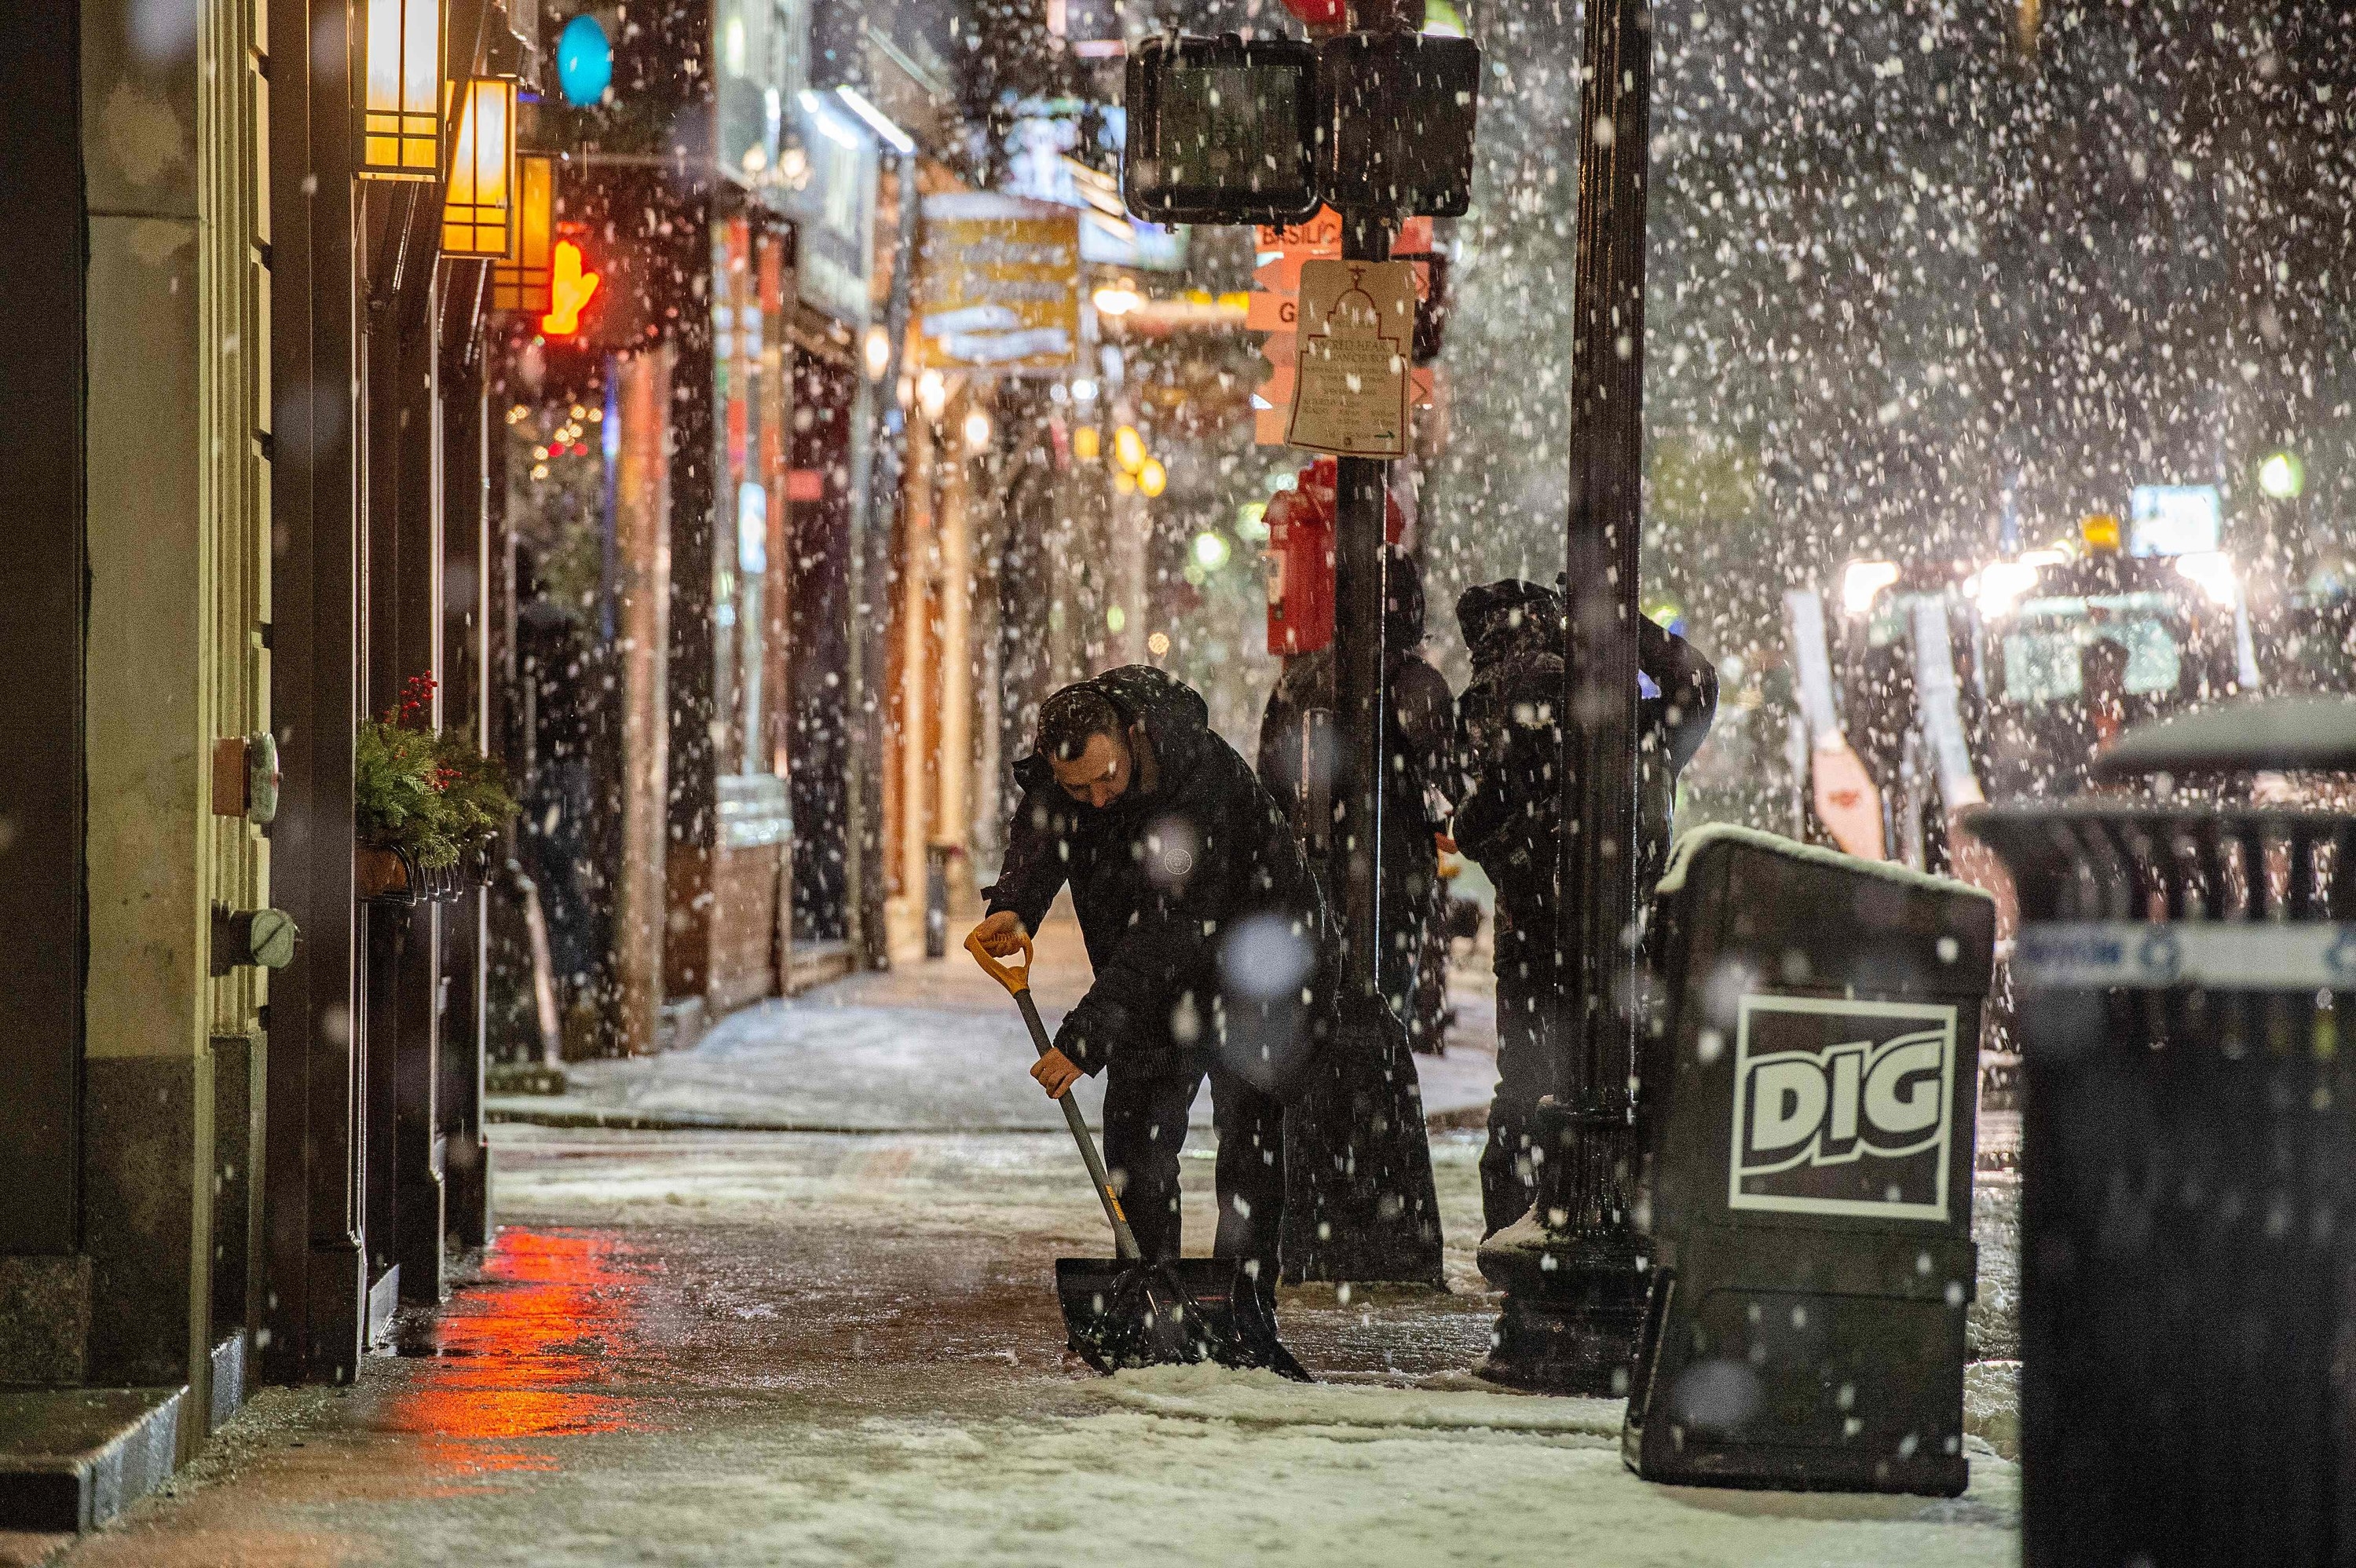 Snow falling outside a busy street or businesses, with someone shoveling the fallen snow